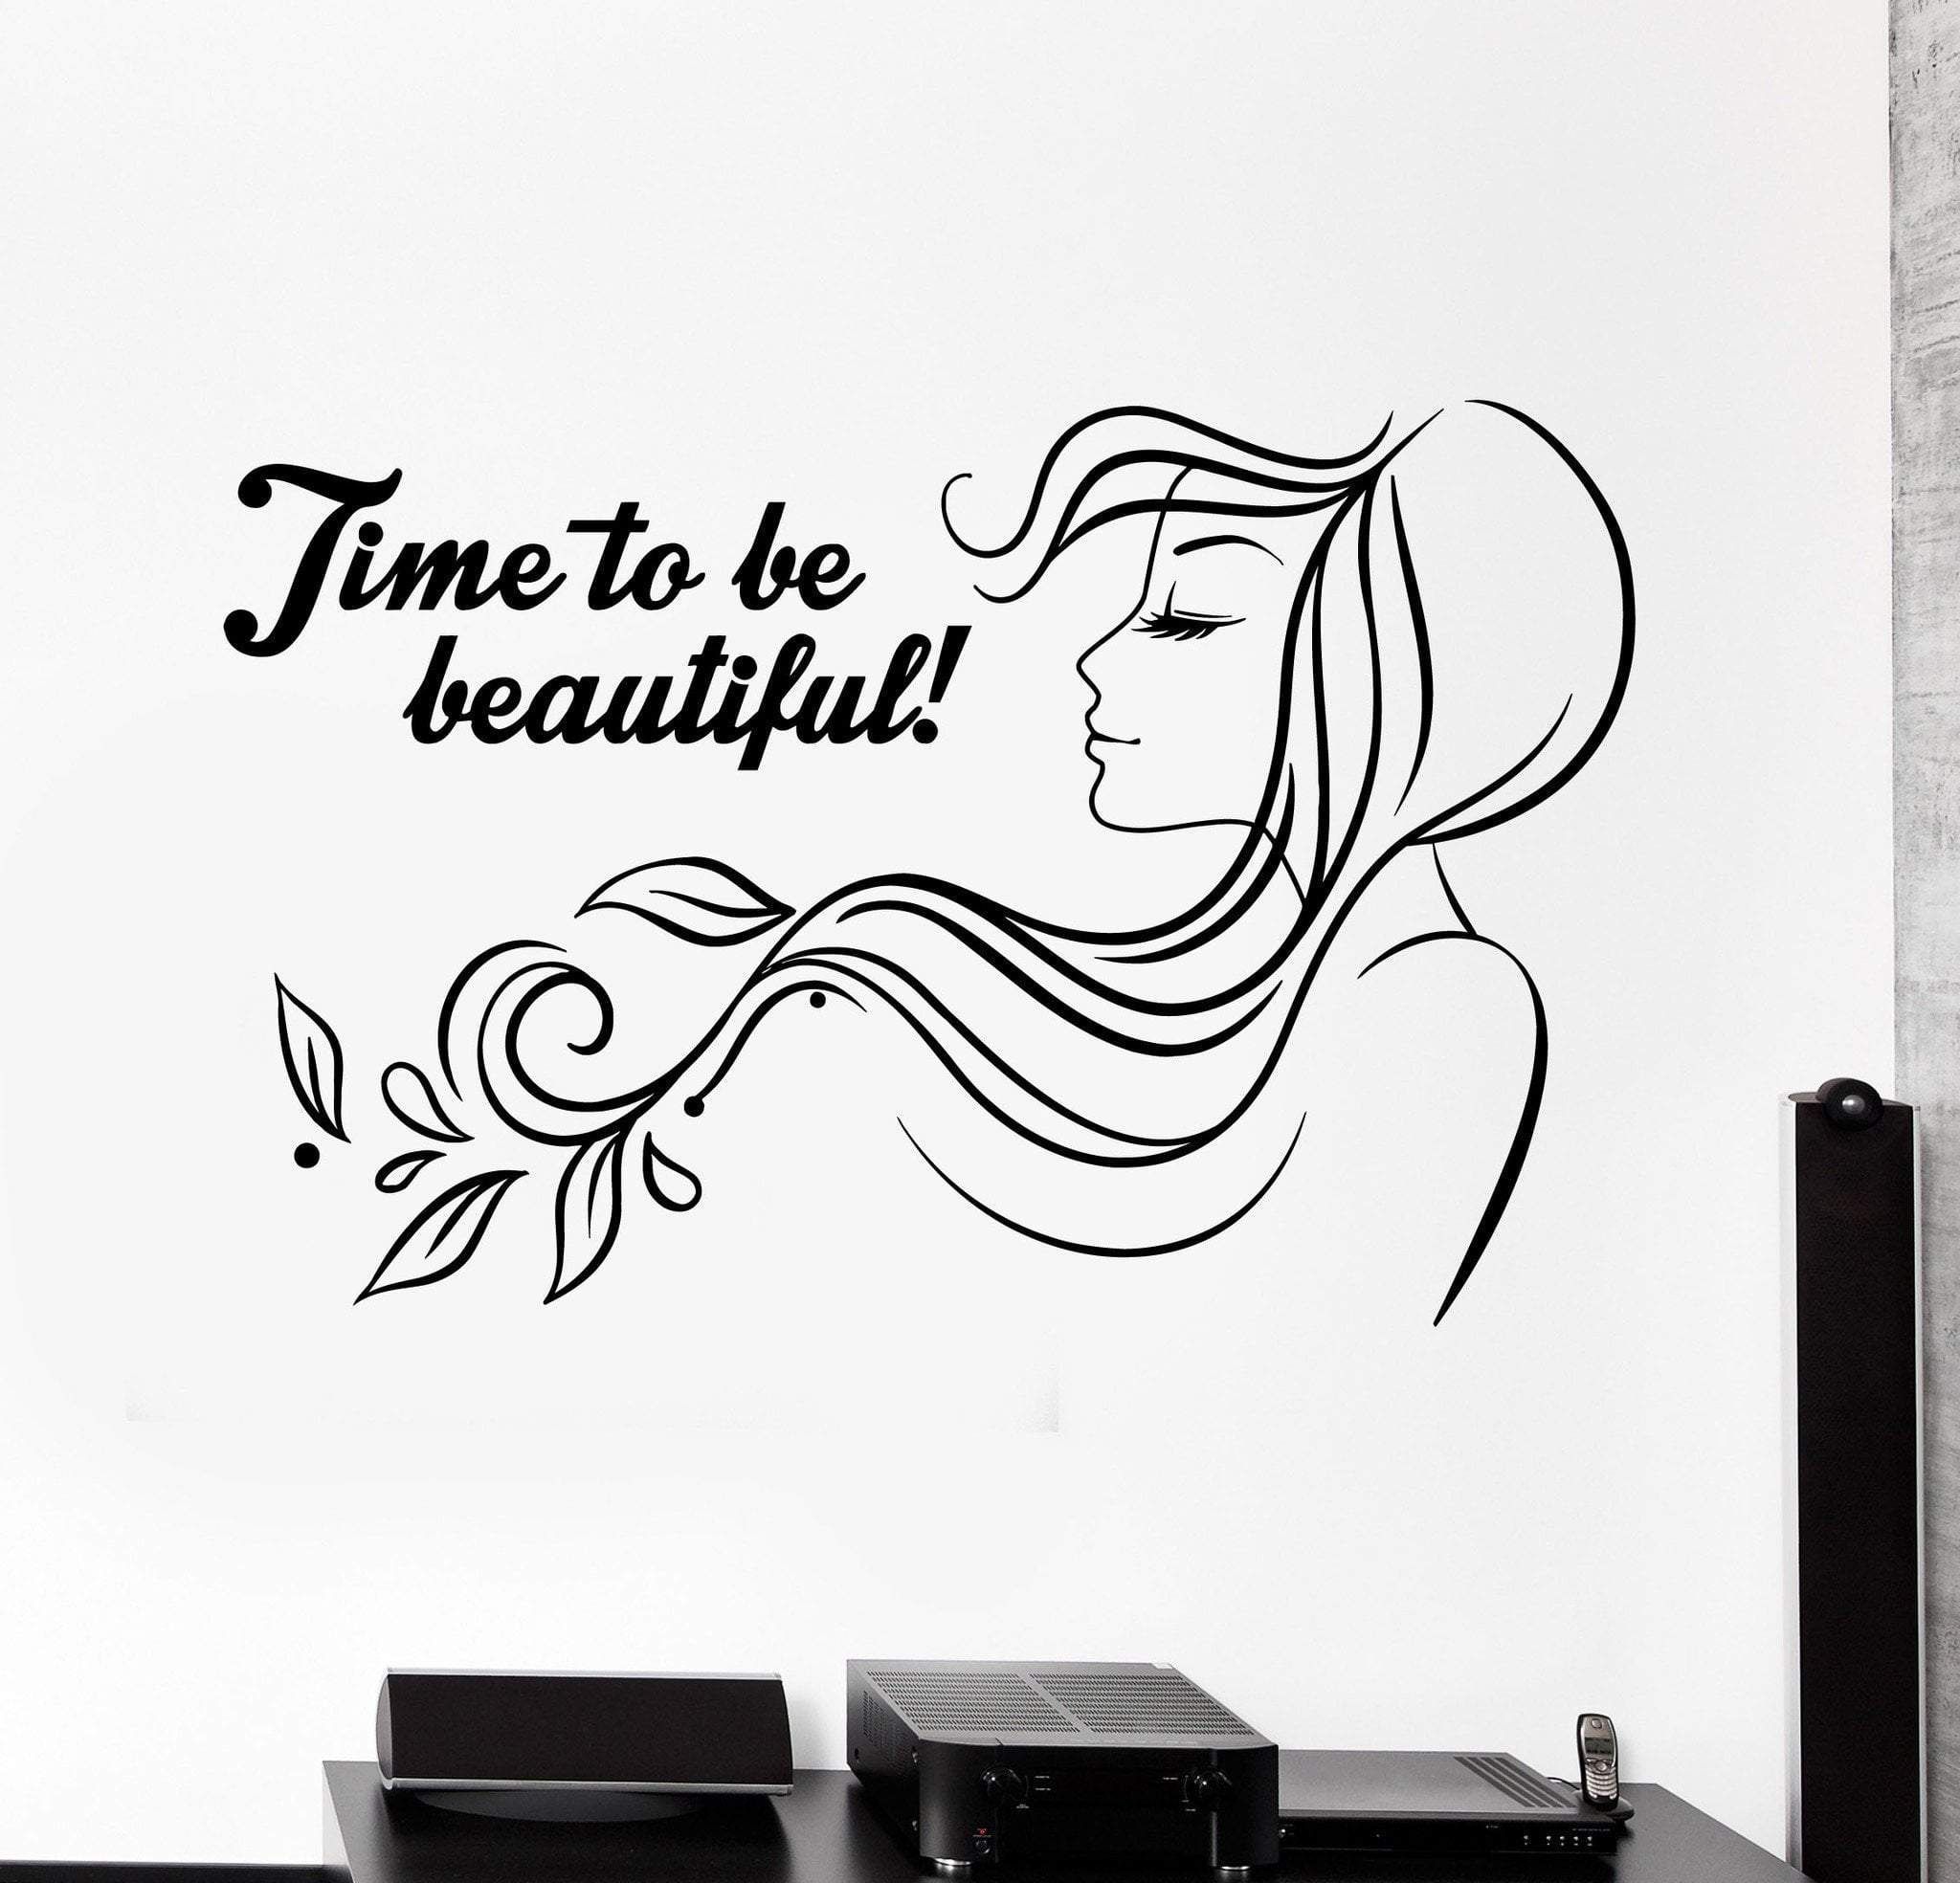 Vinyl Wall Decal Beauty Salon Quote Woman Hair Salon Stickers Mural Unique Gift (ig4614) - Vinyl Wall Decal Beauty Salon Quote Woman Hair Salon Stickers Mural Unique Gift (ig4614) -   15 beauty Salon woman ideas